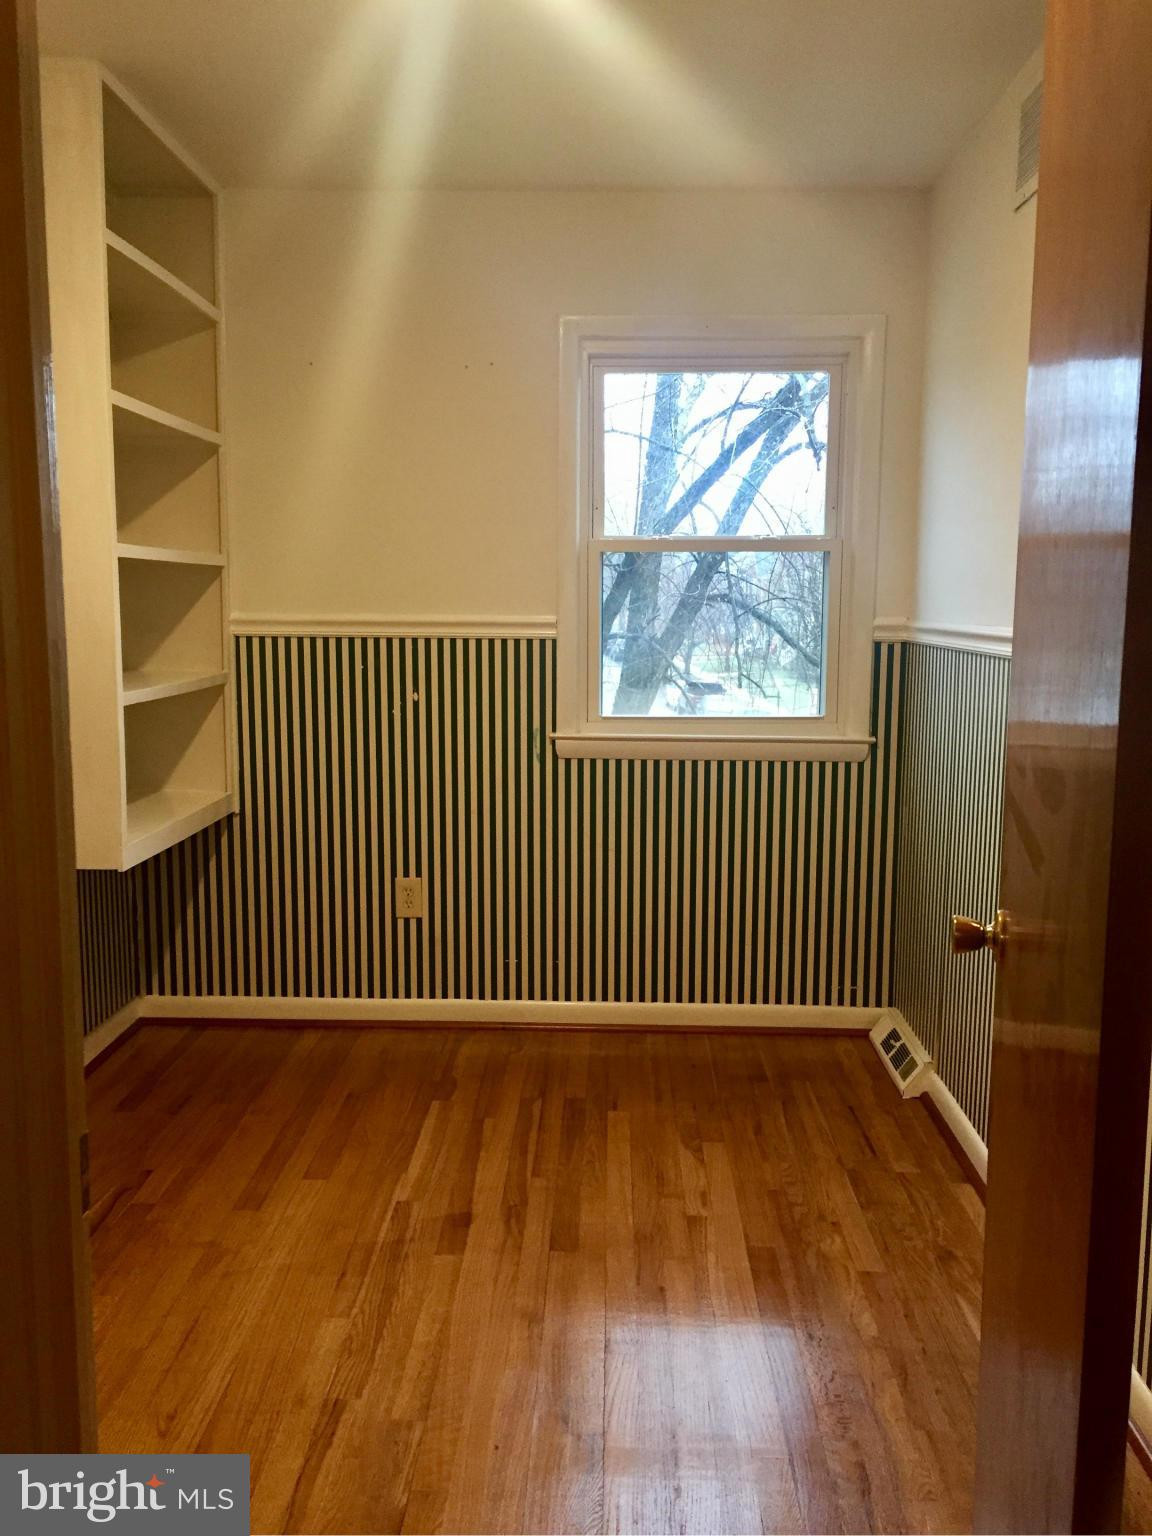 14 Nice Hardwood Floor Refinishing Columbia Md 2024 free download hardwood floor refinishing columbia md of 278 blakeney rd catonsville md 21228 214900 www jillsellsmdhomes intended for beautiful home w many updates throughout freshly painted newer windows